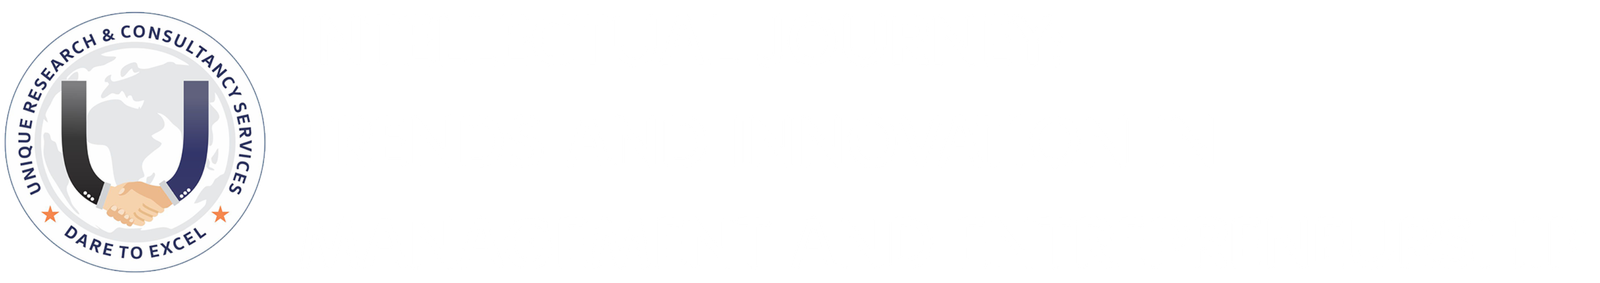 Intellectual Journey: Trends and Innovations in Management and Entrepreneurship